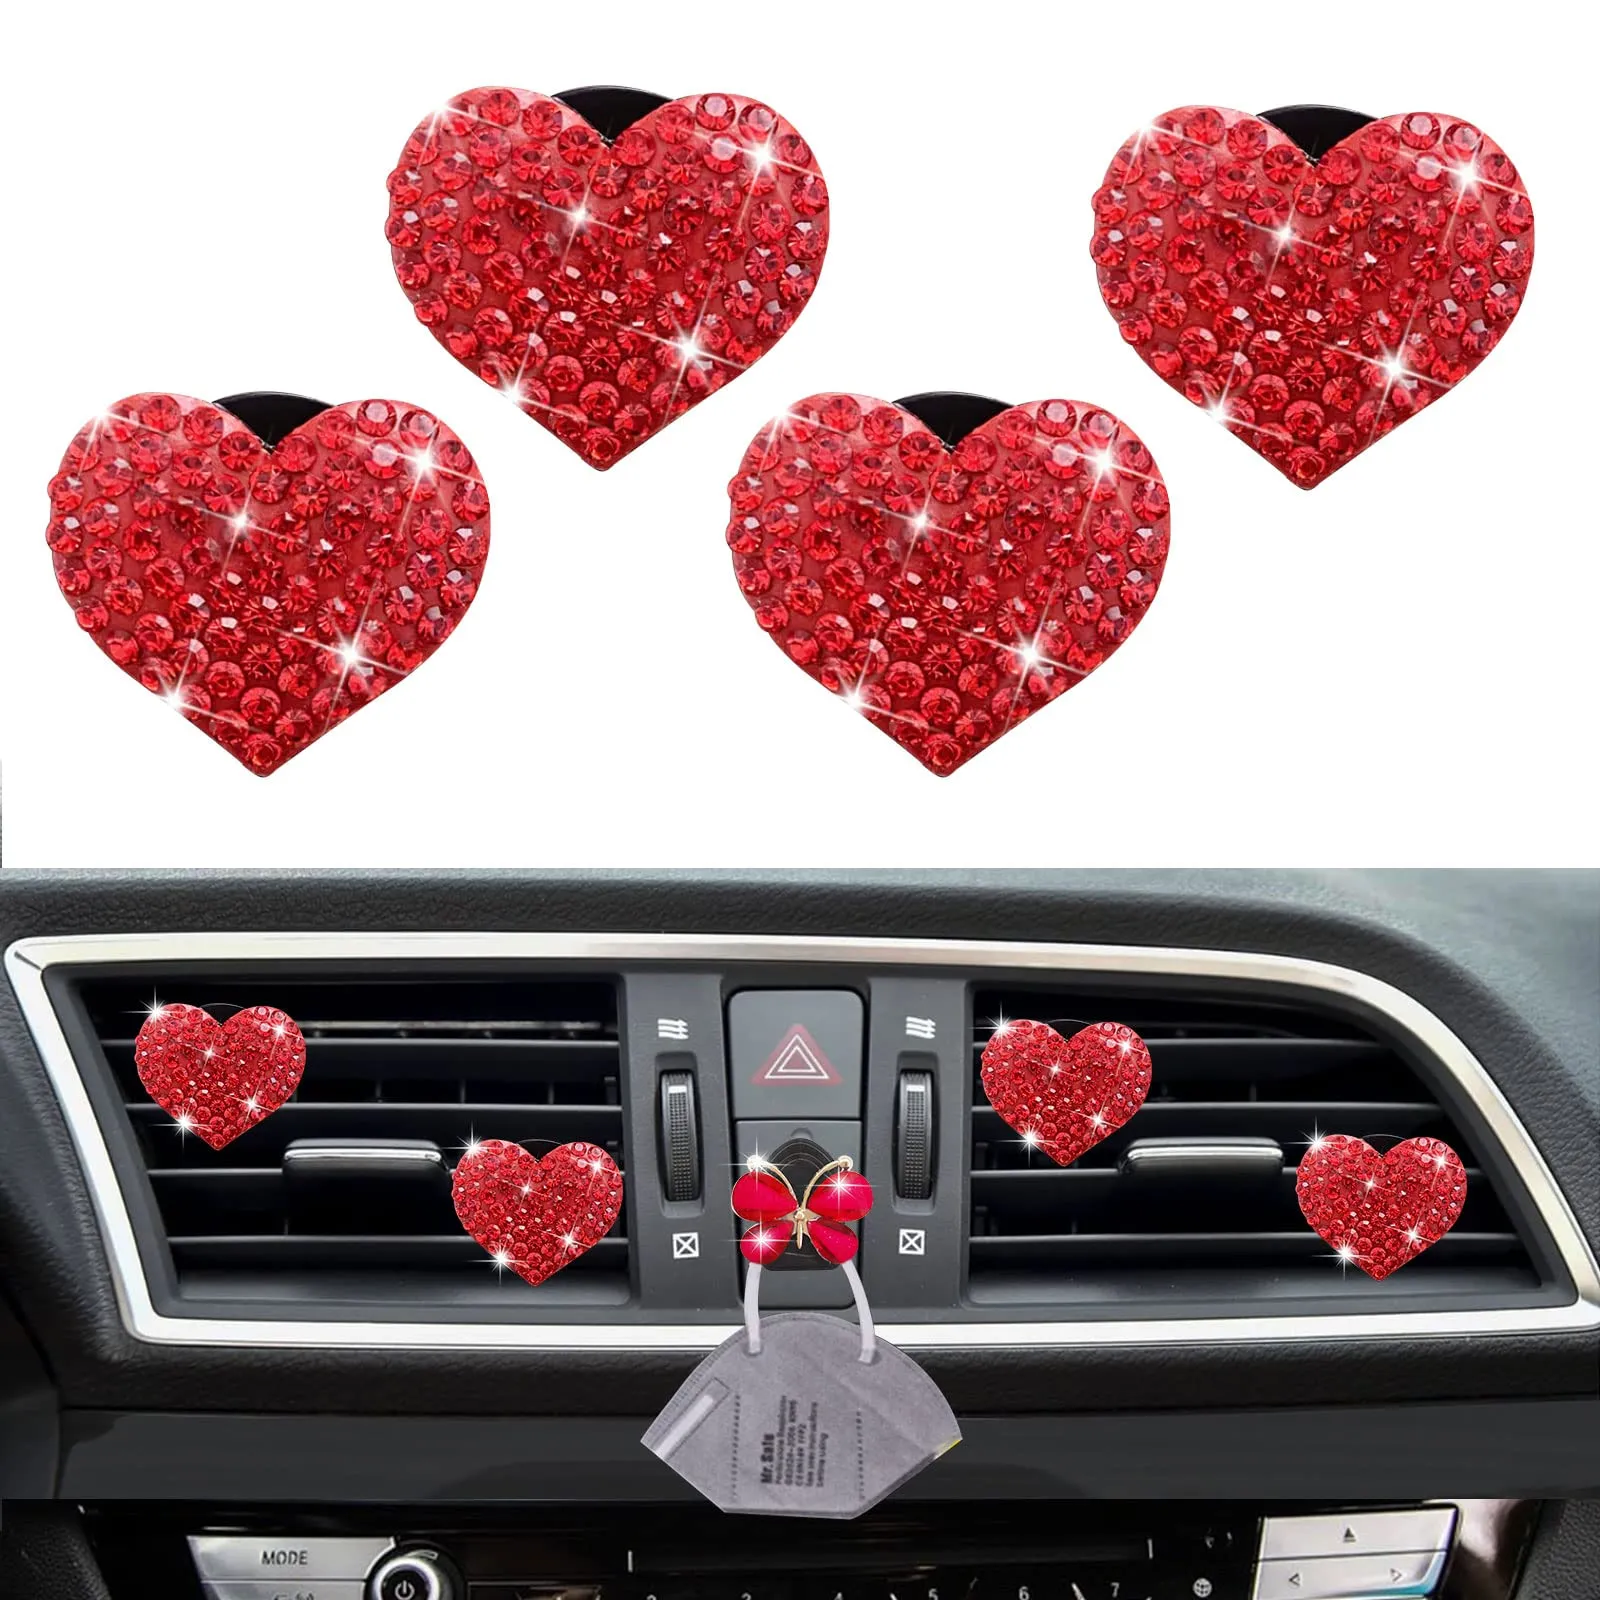 Air Freshener Bling Red Lips Vent Clips Heart Shape Crystal Car Clip Charms Fresheners For Women Rhinestone Diffuser Cute De Lulubaby Amjbr